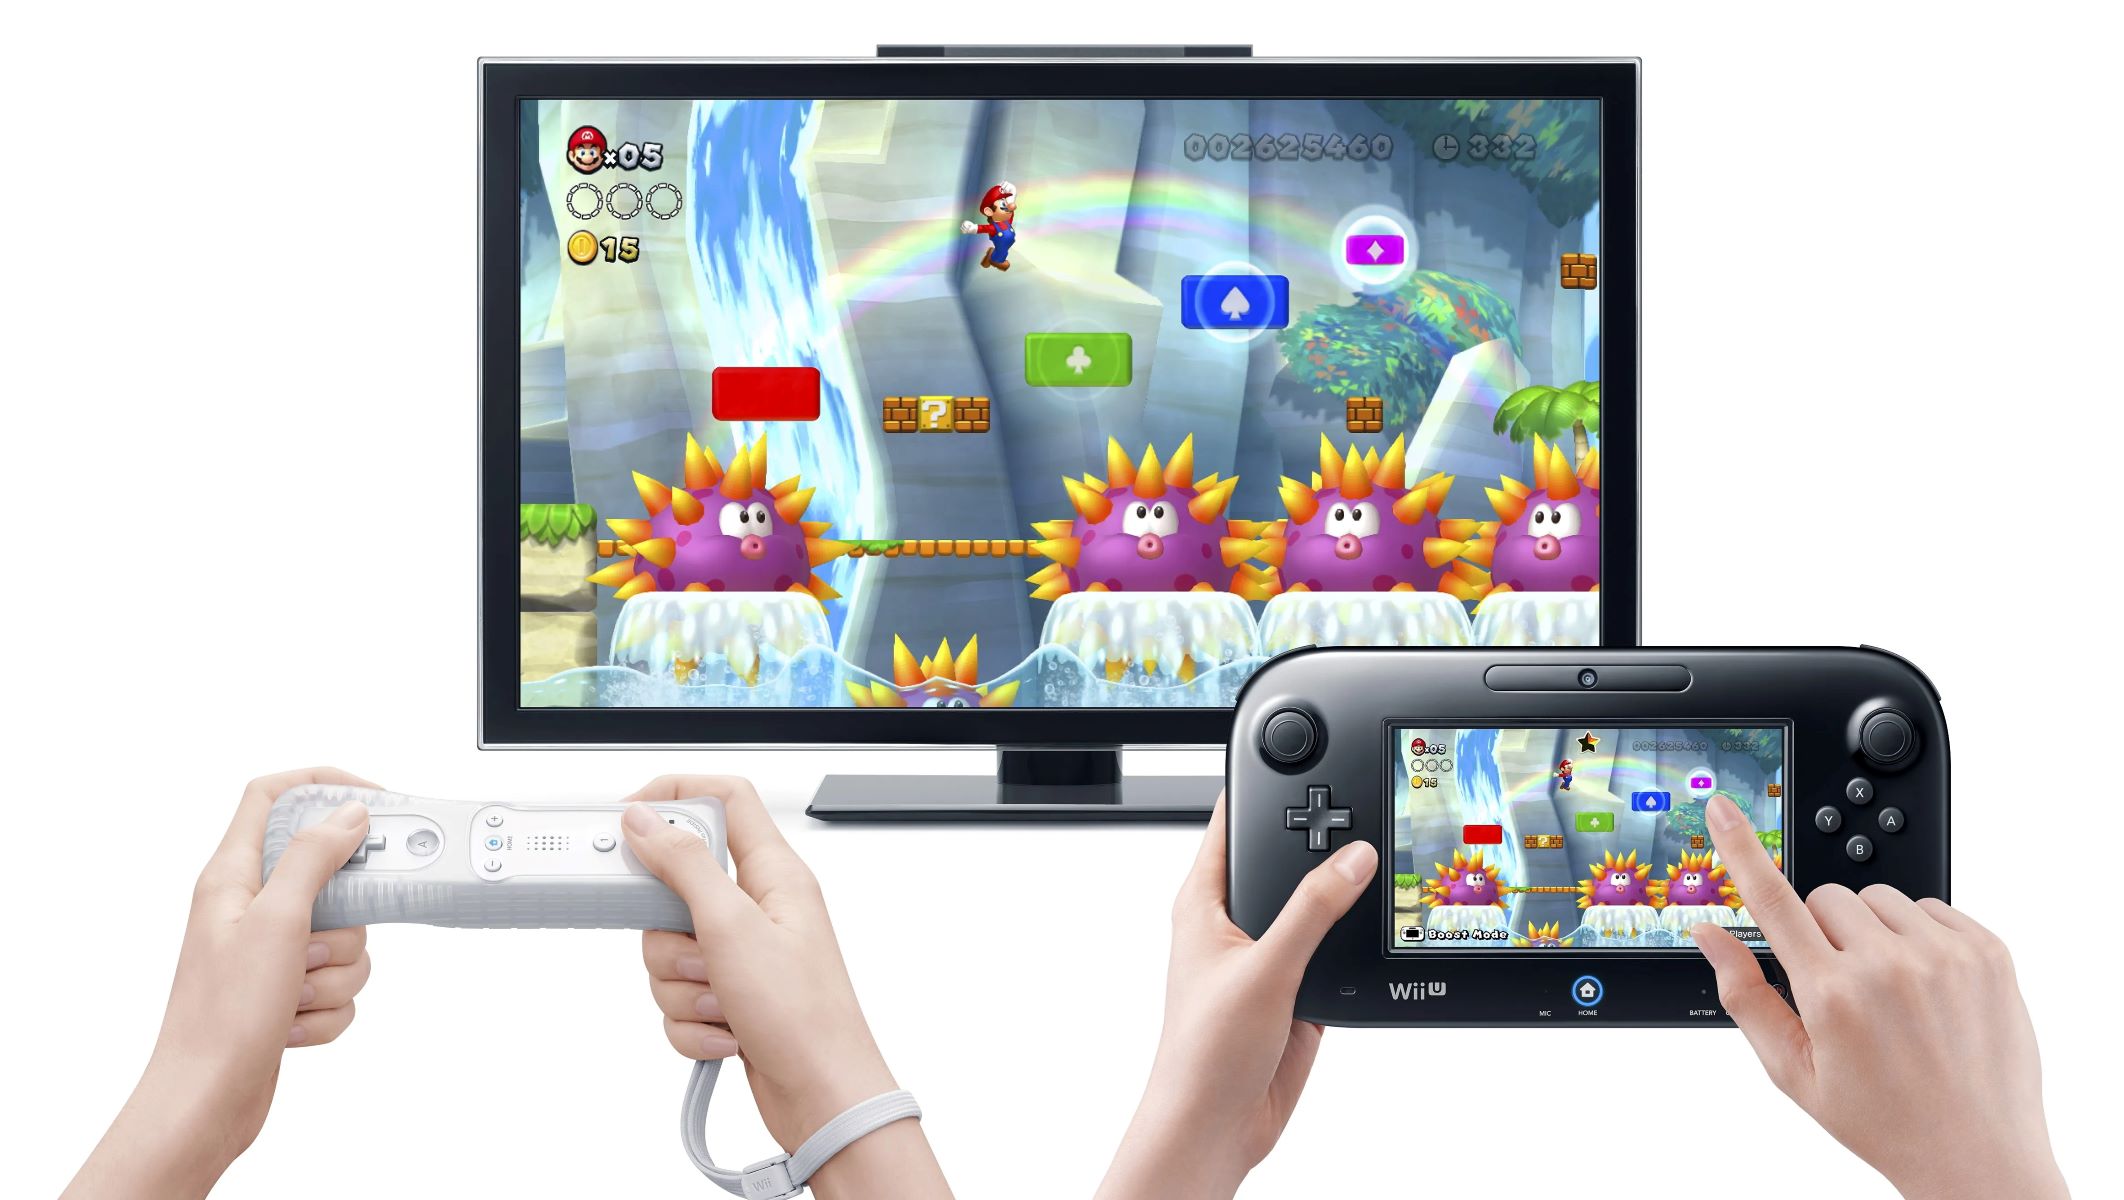 wii-u-switching-between-tv-and-gamepad-in-wii-mode